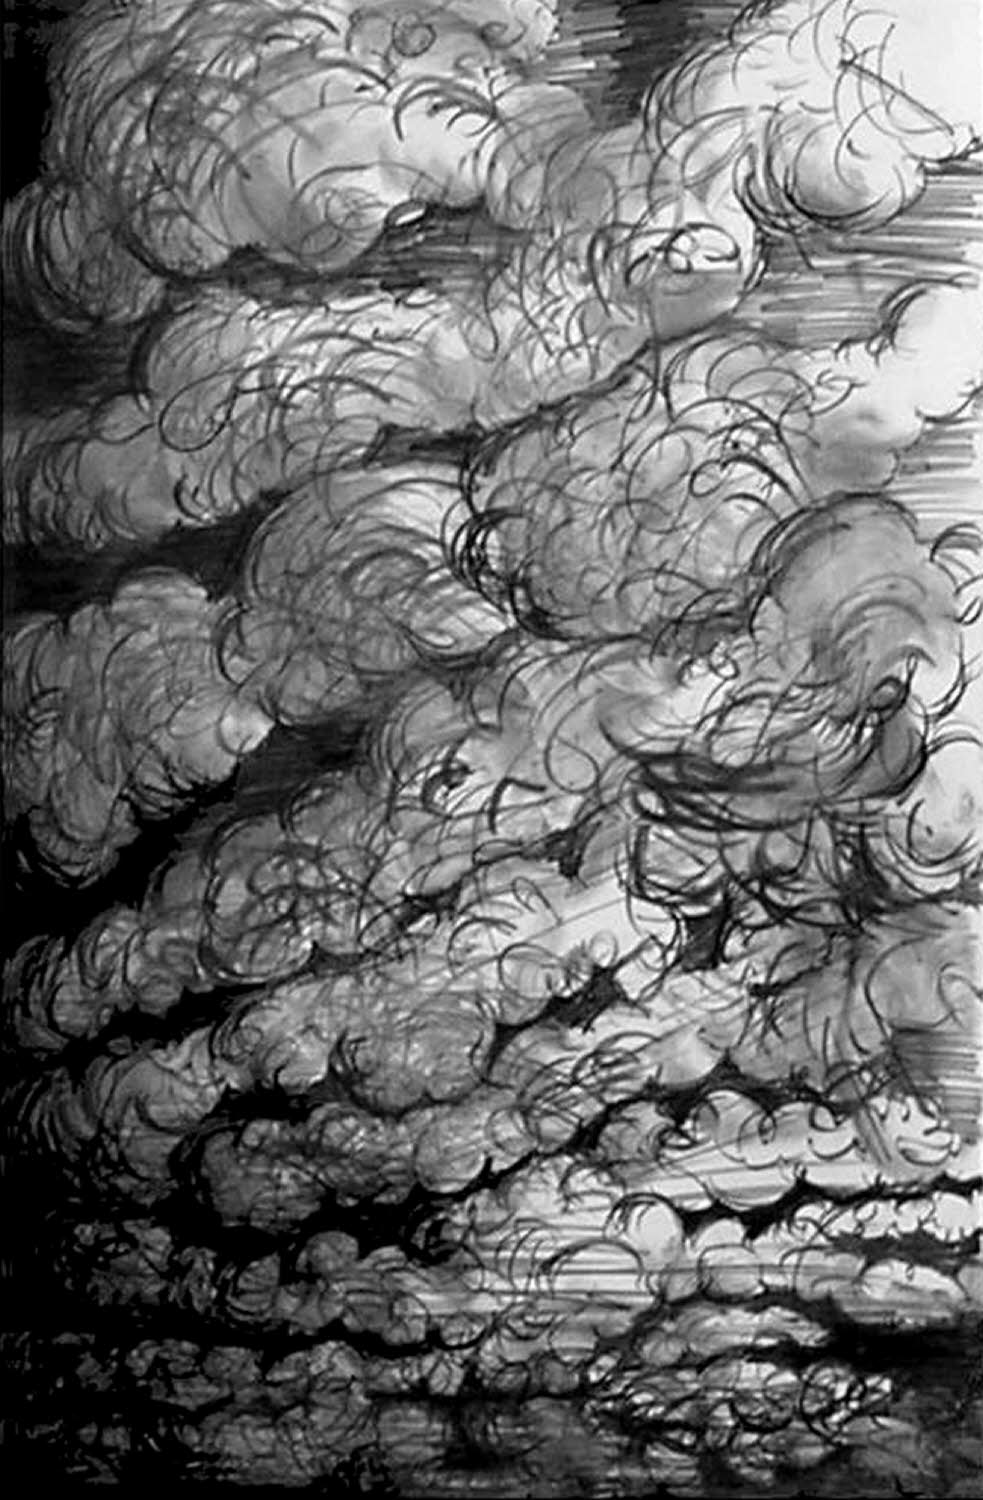 Richmond, 2005, graphite on synthetic paper, 26x17 inches